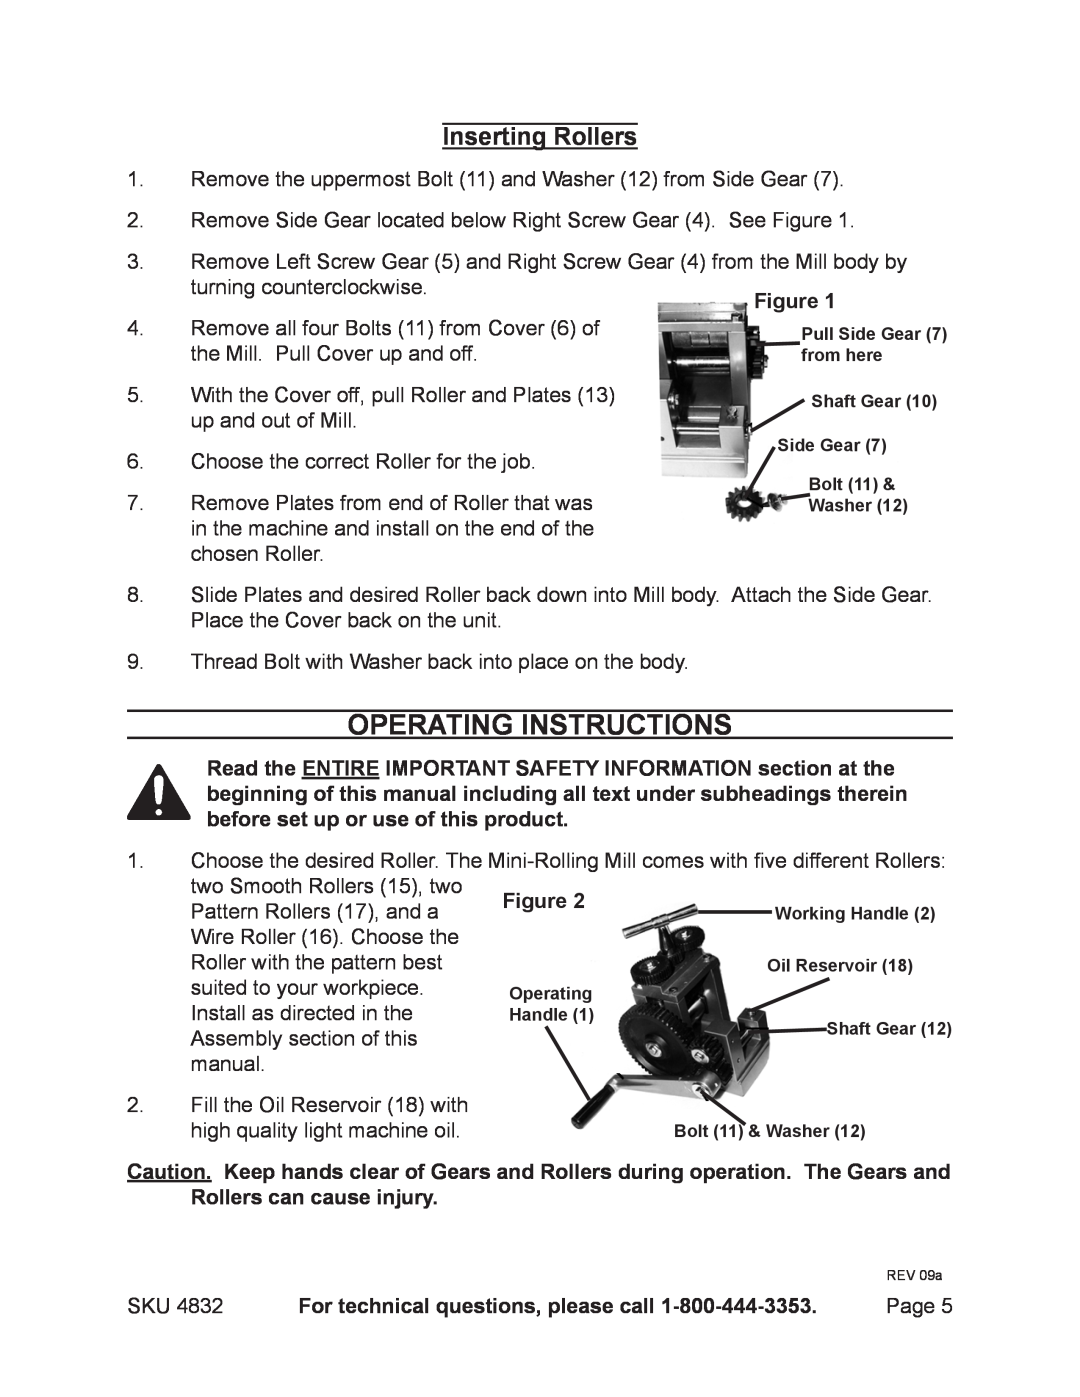 Harbor Freight Tools 4832 manual Operating Instructions, Inserting Rollers, For technical questions, please call 